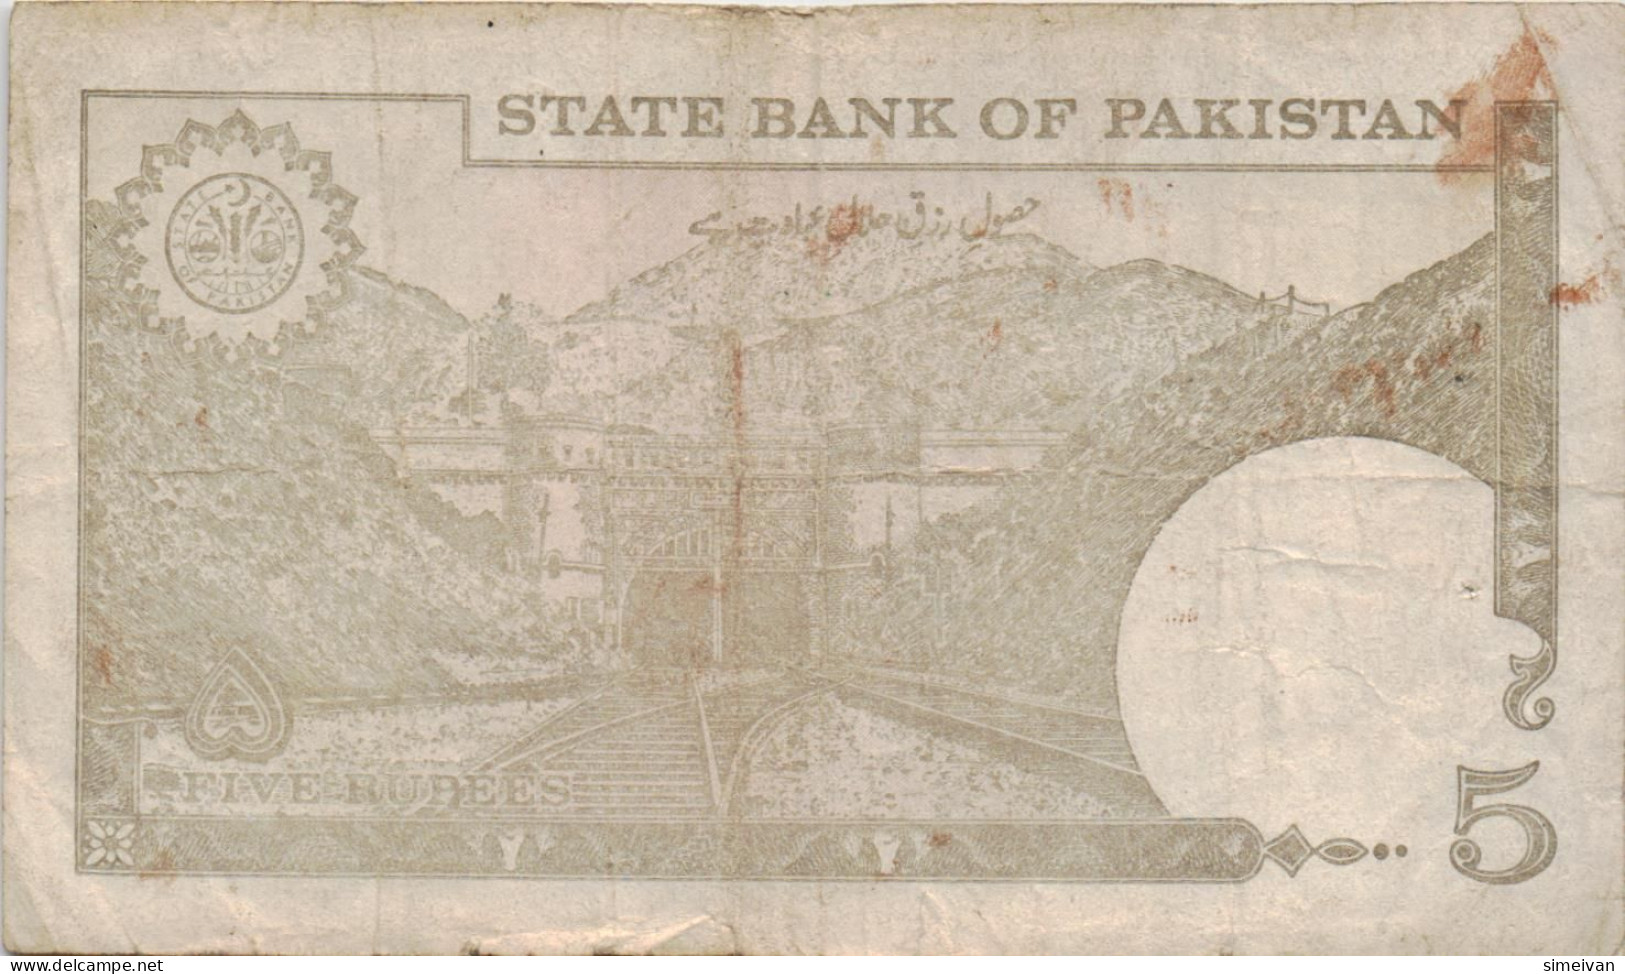 Pakistan 5 Rupees ND (1976-84) P-28 Banknote Middle East Currency #5343 - Pakistan